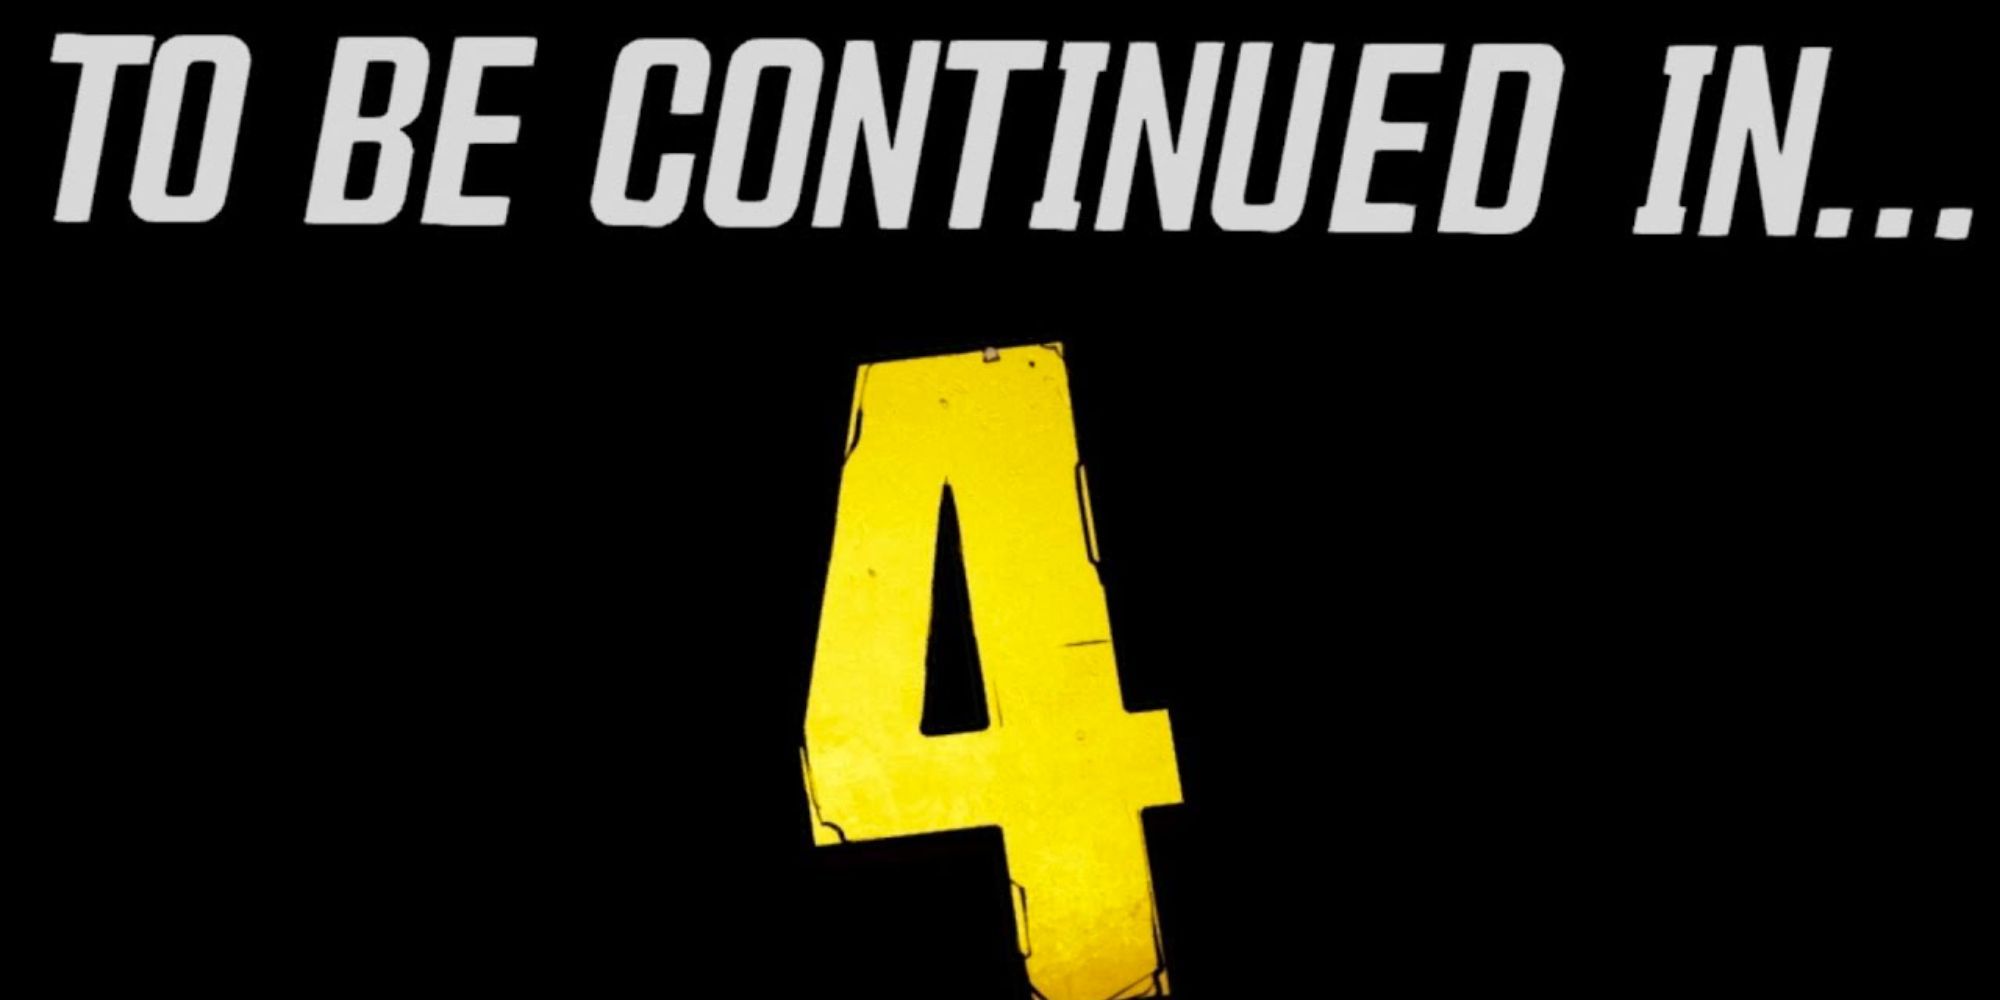 Borderlands 3 Fake Ending Screen To Be Continued in 4